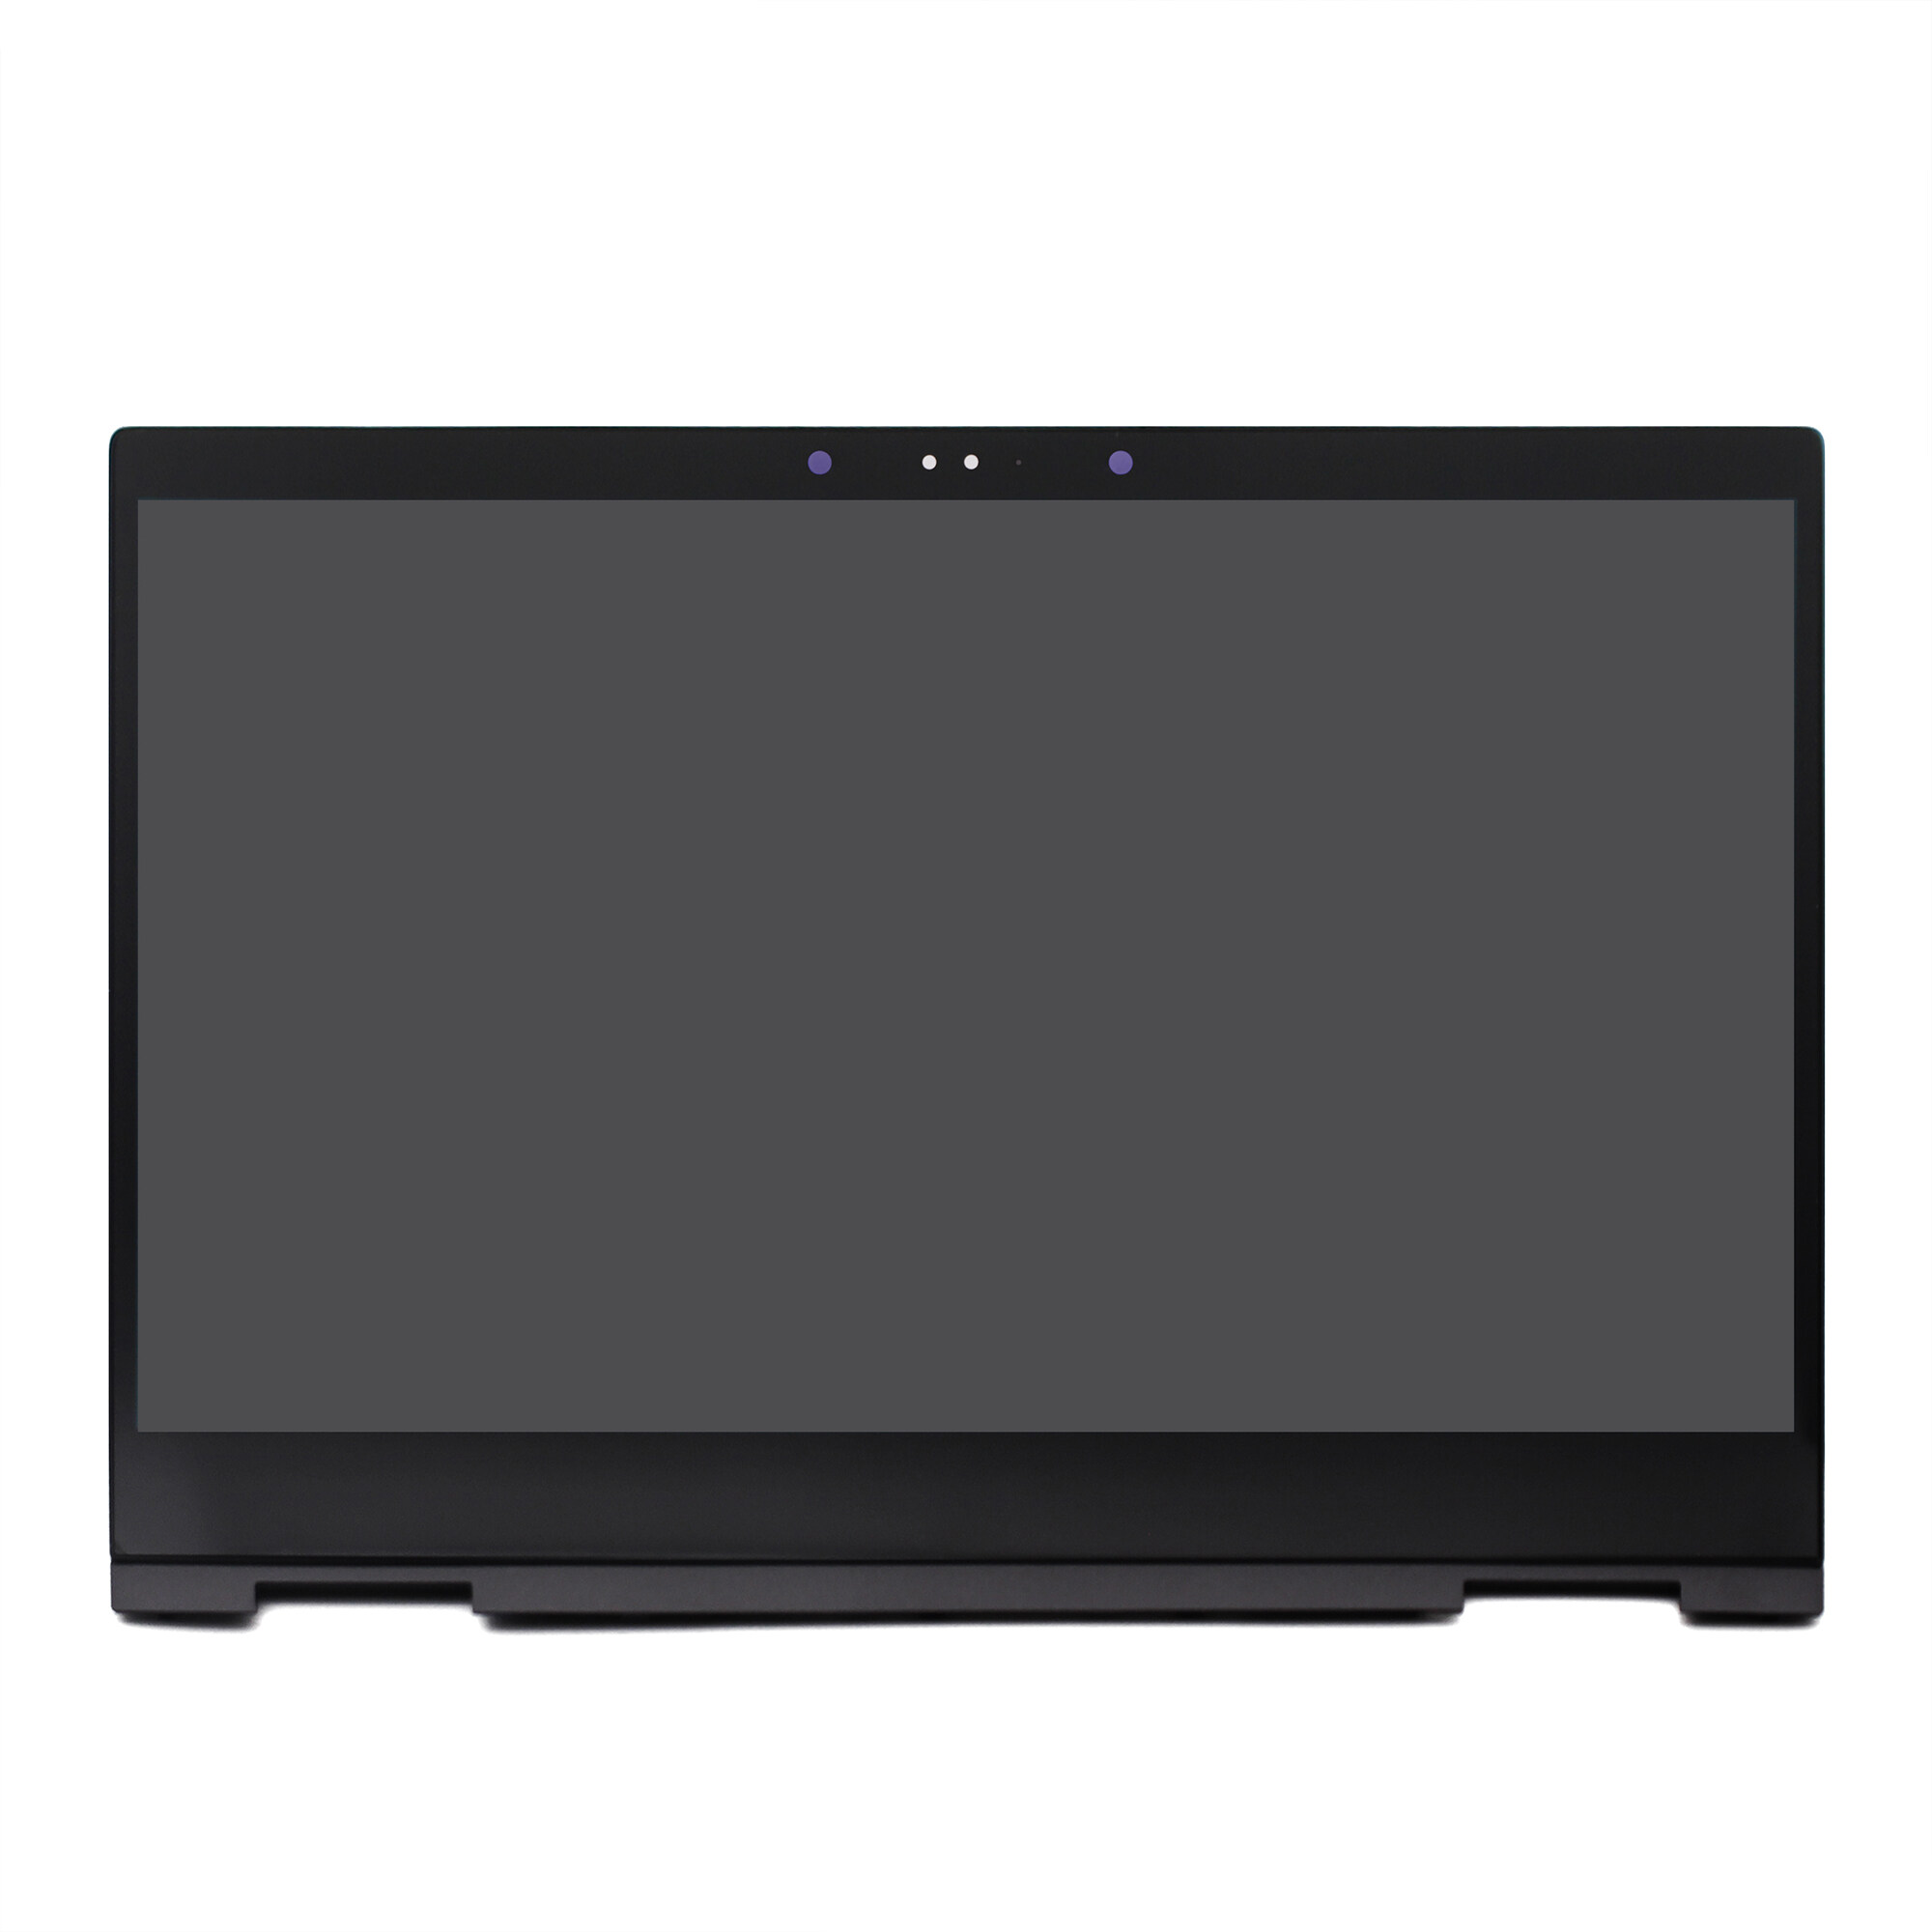 Kreplacement LCD Display Touch Screen Glass Panel Assembly+Control Board +Bezel For HP x360 13-ag0502sa 13-ag0503na 13-ag0999nf